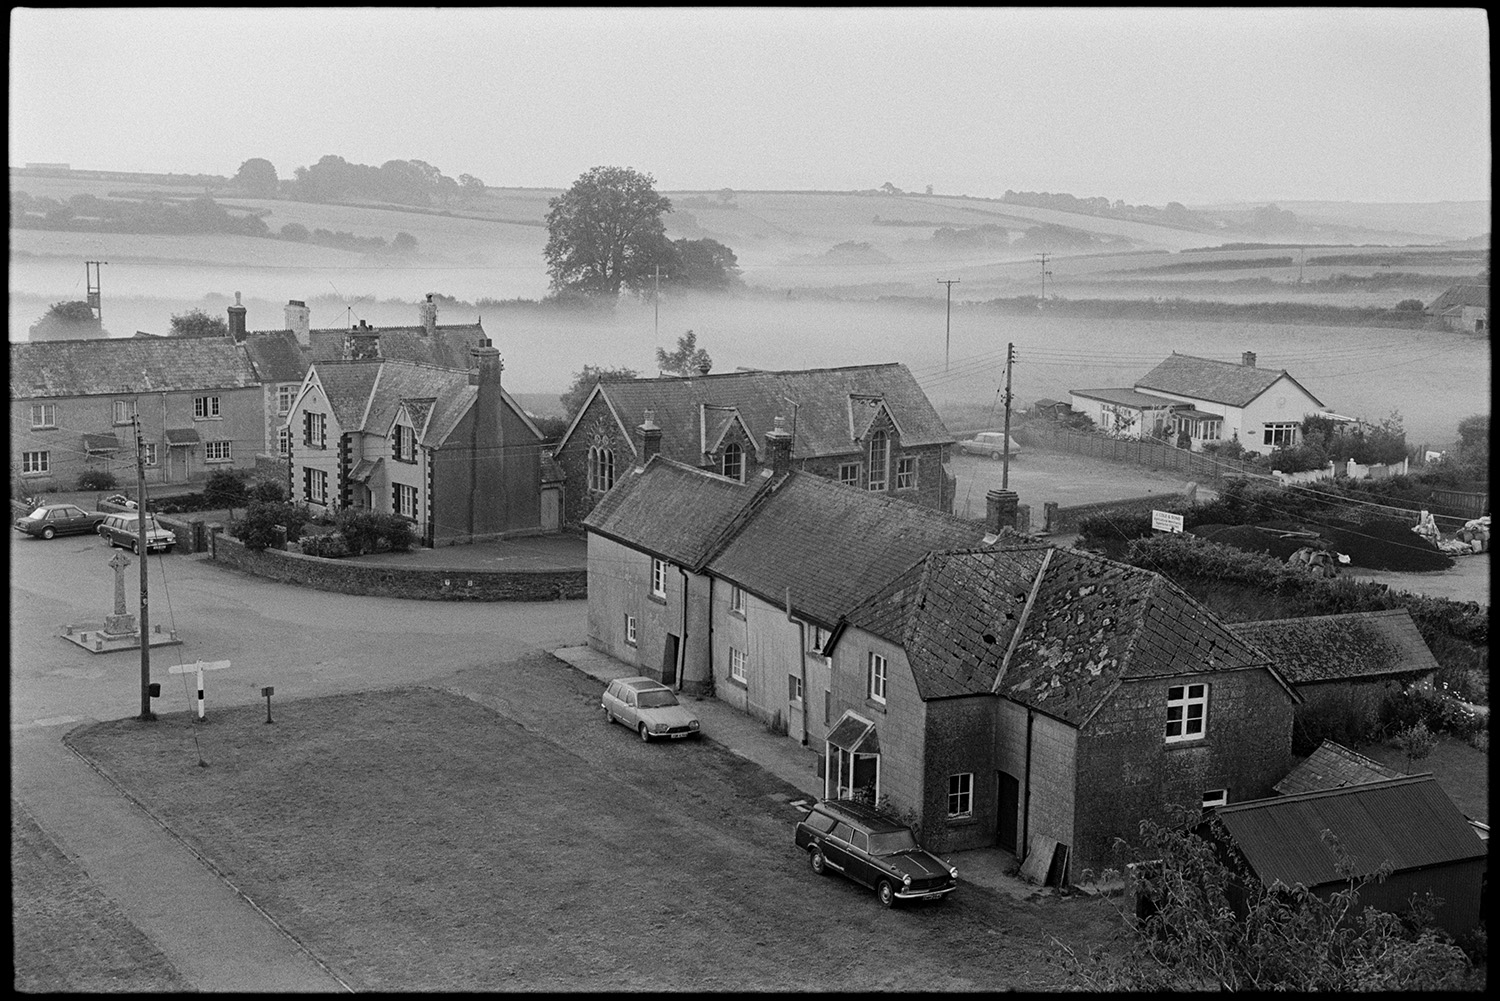 View of village from church tower, early mist. 
[A view of houses and parked cars in Ashreigney taken from Ashreigney Church tower in the early morning. The war memorial can be see in the village square and misty fields are visible in the background.]